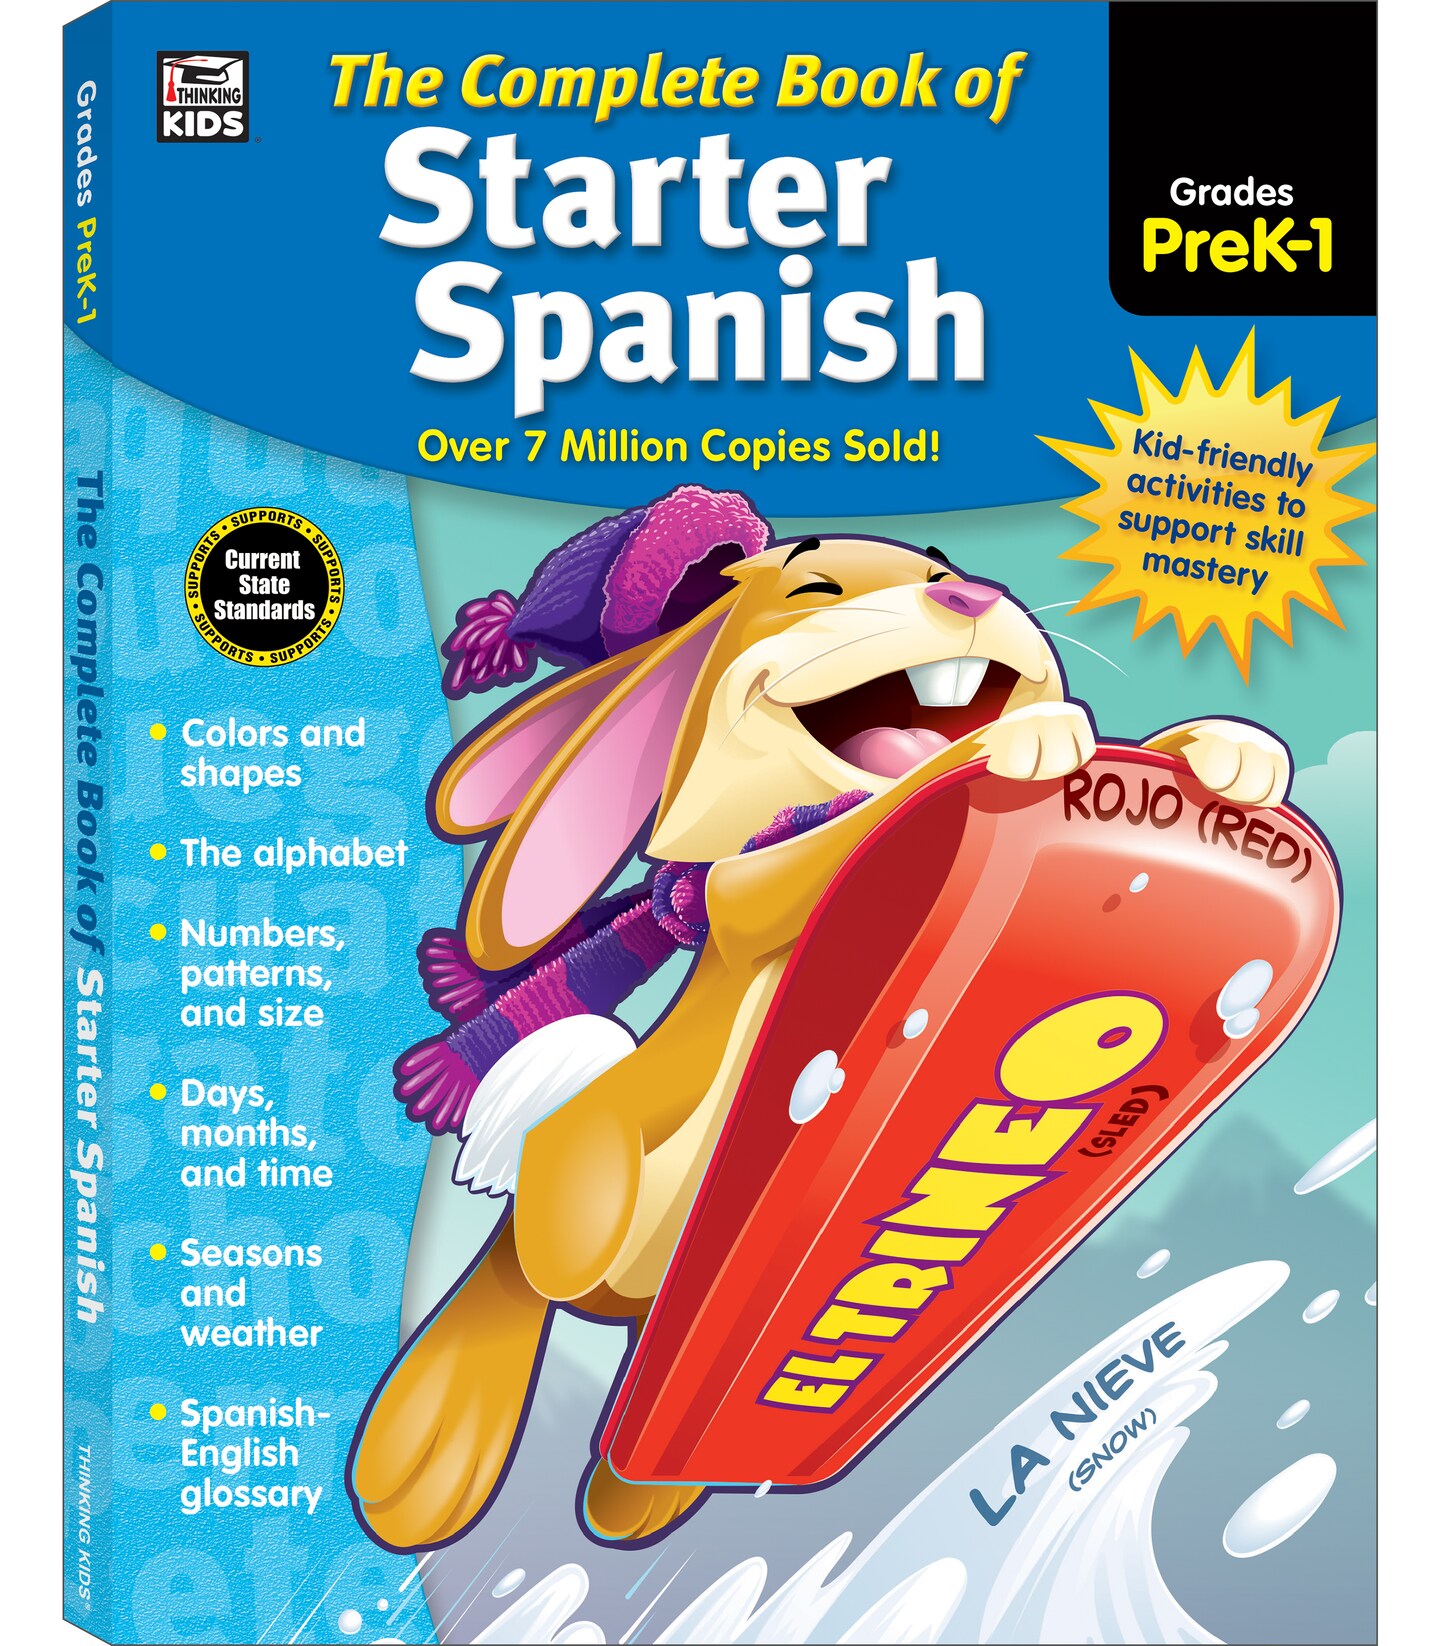 Complete Book of Starter Spanish Workbook for Kids, PreK-Grade 1 Spanish Learning, Basic Spanish Vocabulary, Colors, Shapes, Alphabet, Numbers, Seasons, Weather With Tracing and Coloring Activities